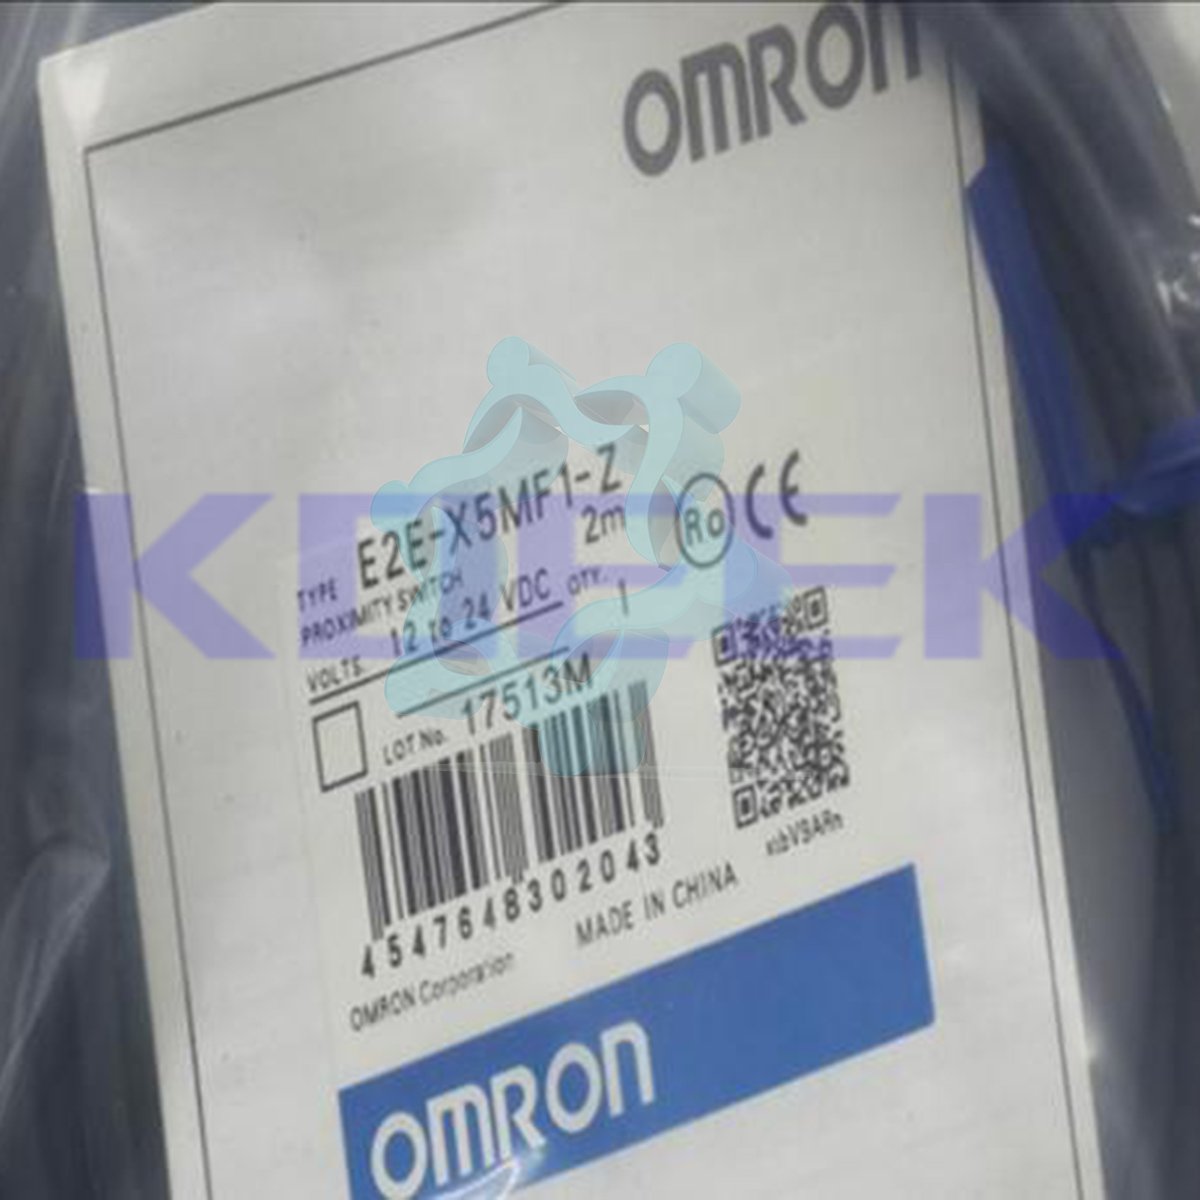 E2E-X5MF1-Z KOEED 1, 80%, import_2020_10_10_031751, Omron, Other